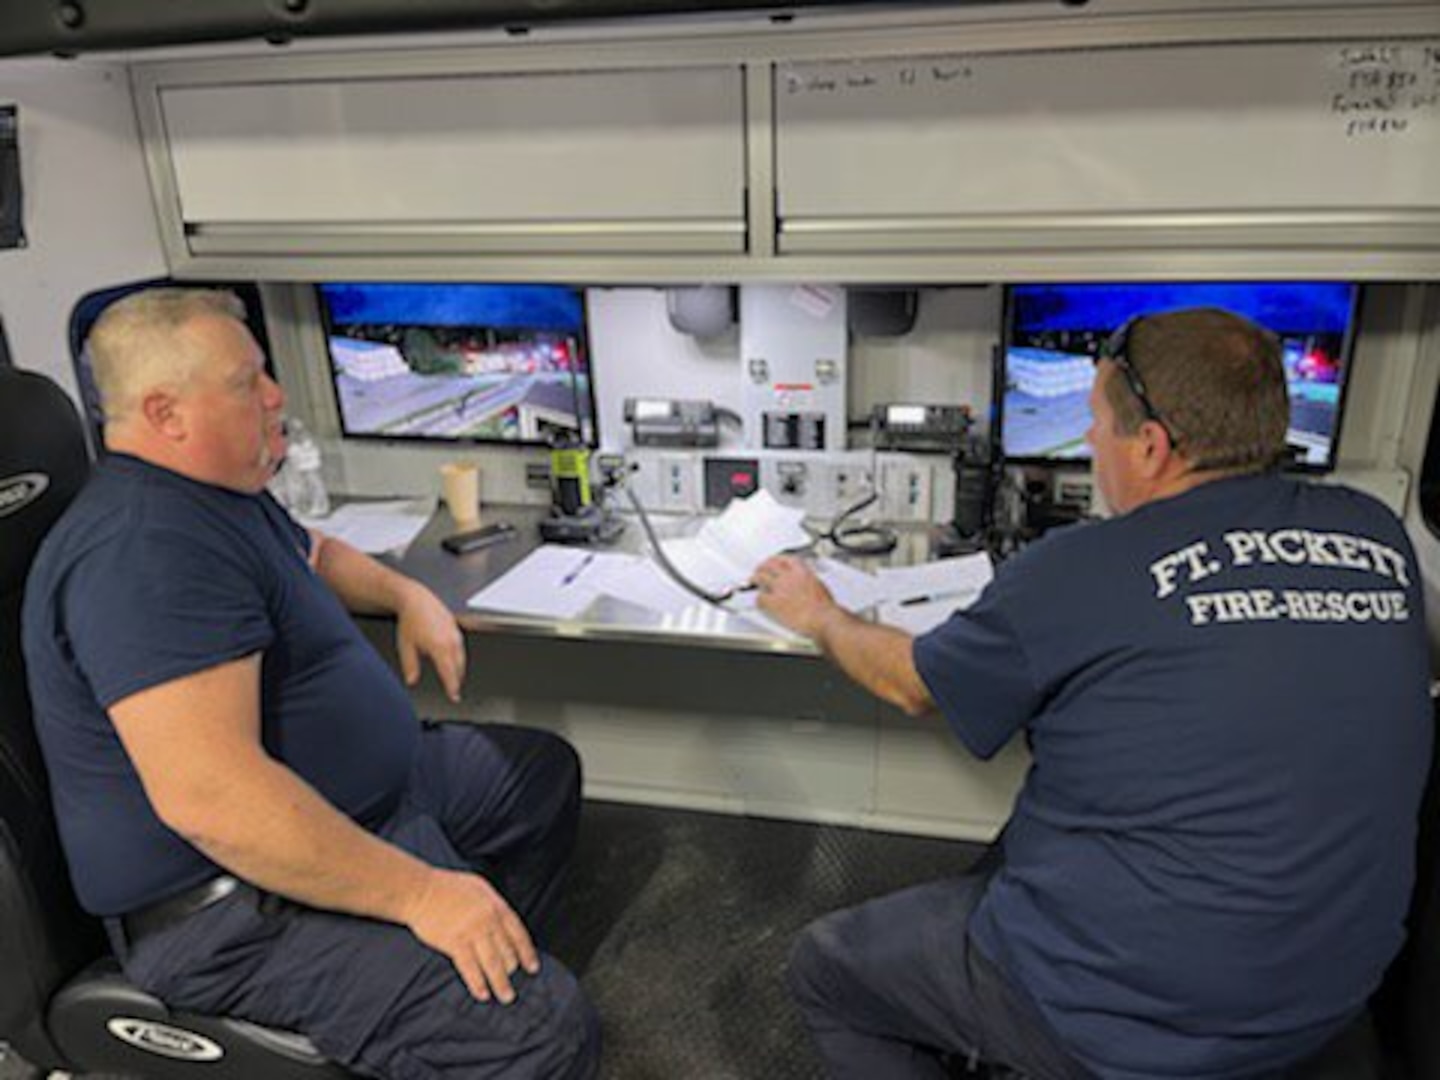 Fort Pickett Fire Dept. helps lead response to large commercial fire